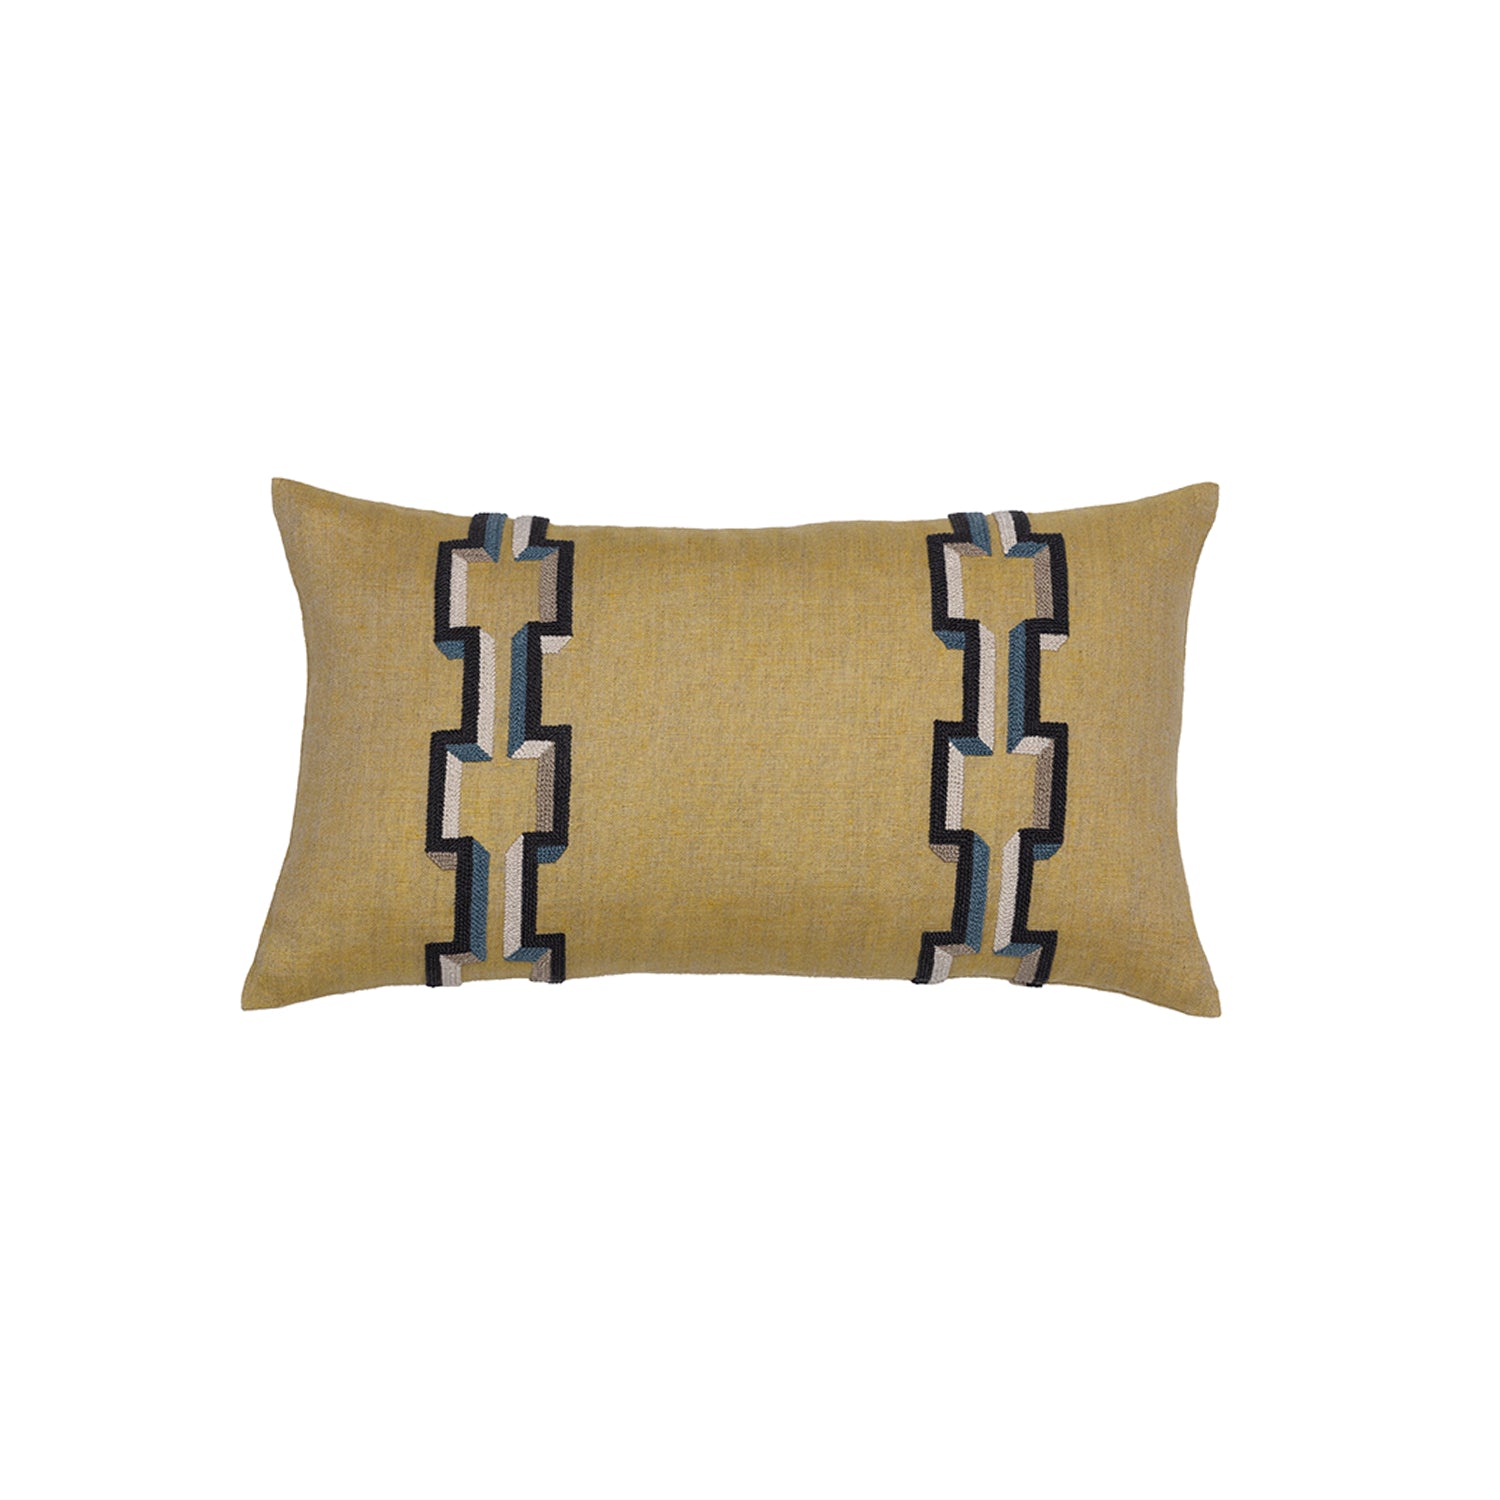 Rectangular throw pillow with an embroidered geometric stripe pattern in shades of black, blue and gray on a gold field.